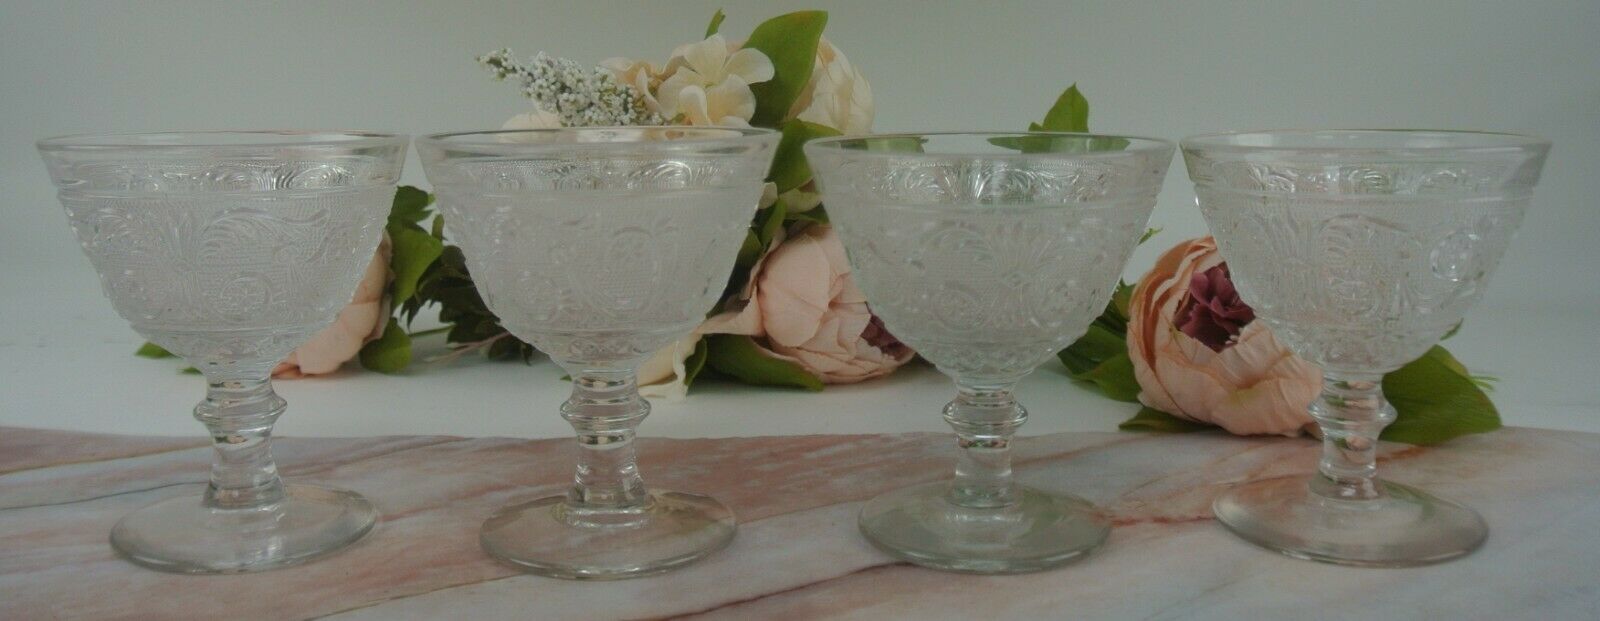 Set Of 4 Ice Cream Dish 6 Oz In Duncan & Miller Sandwich Clear Glass Pattern